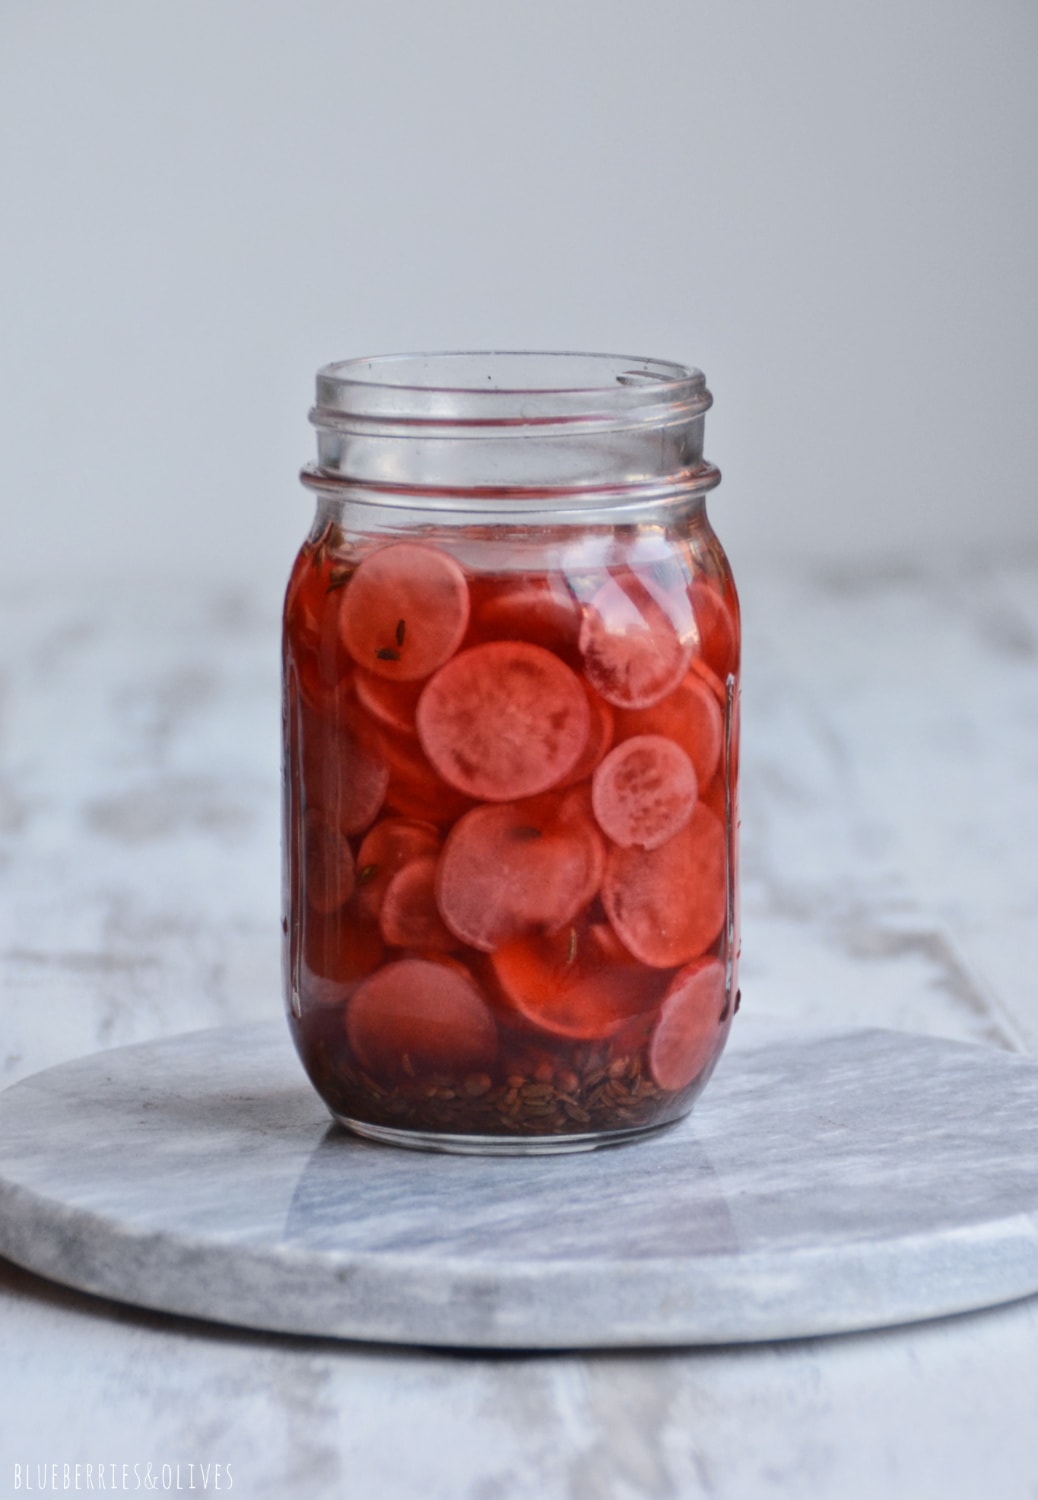 PICKLED RADISHES IN A GLASS JAR, WHITE MARBLE CUTTING BOARD AND WHITE BACKGROUND